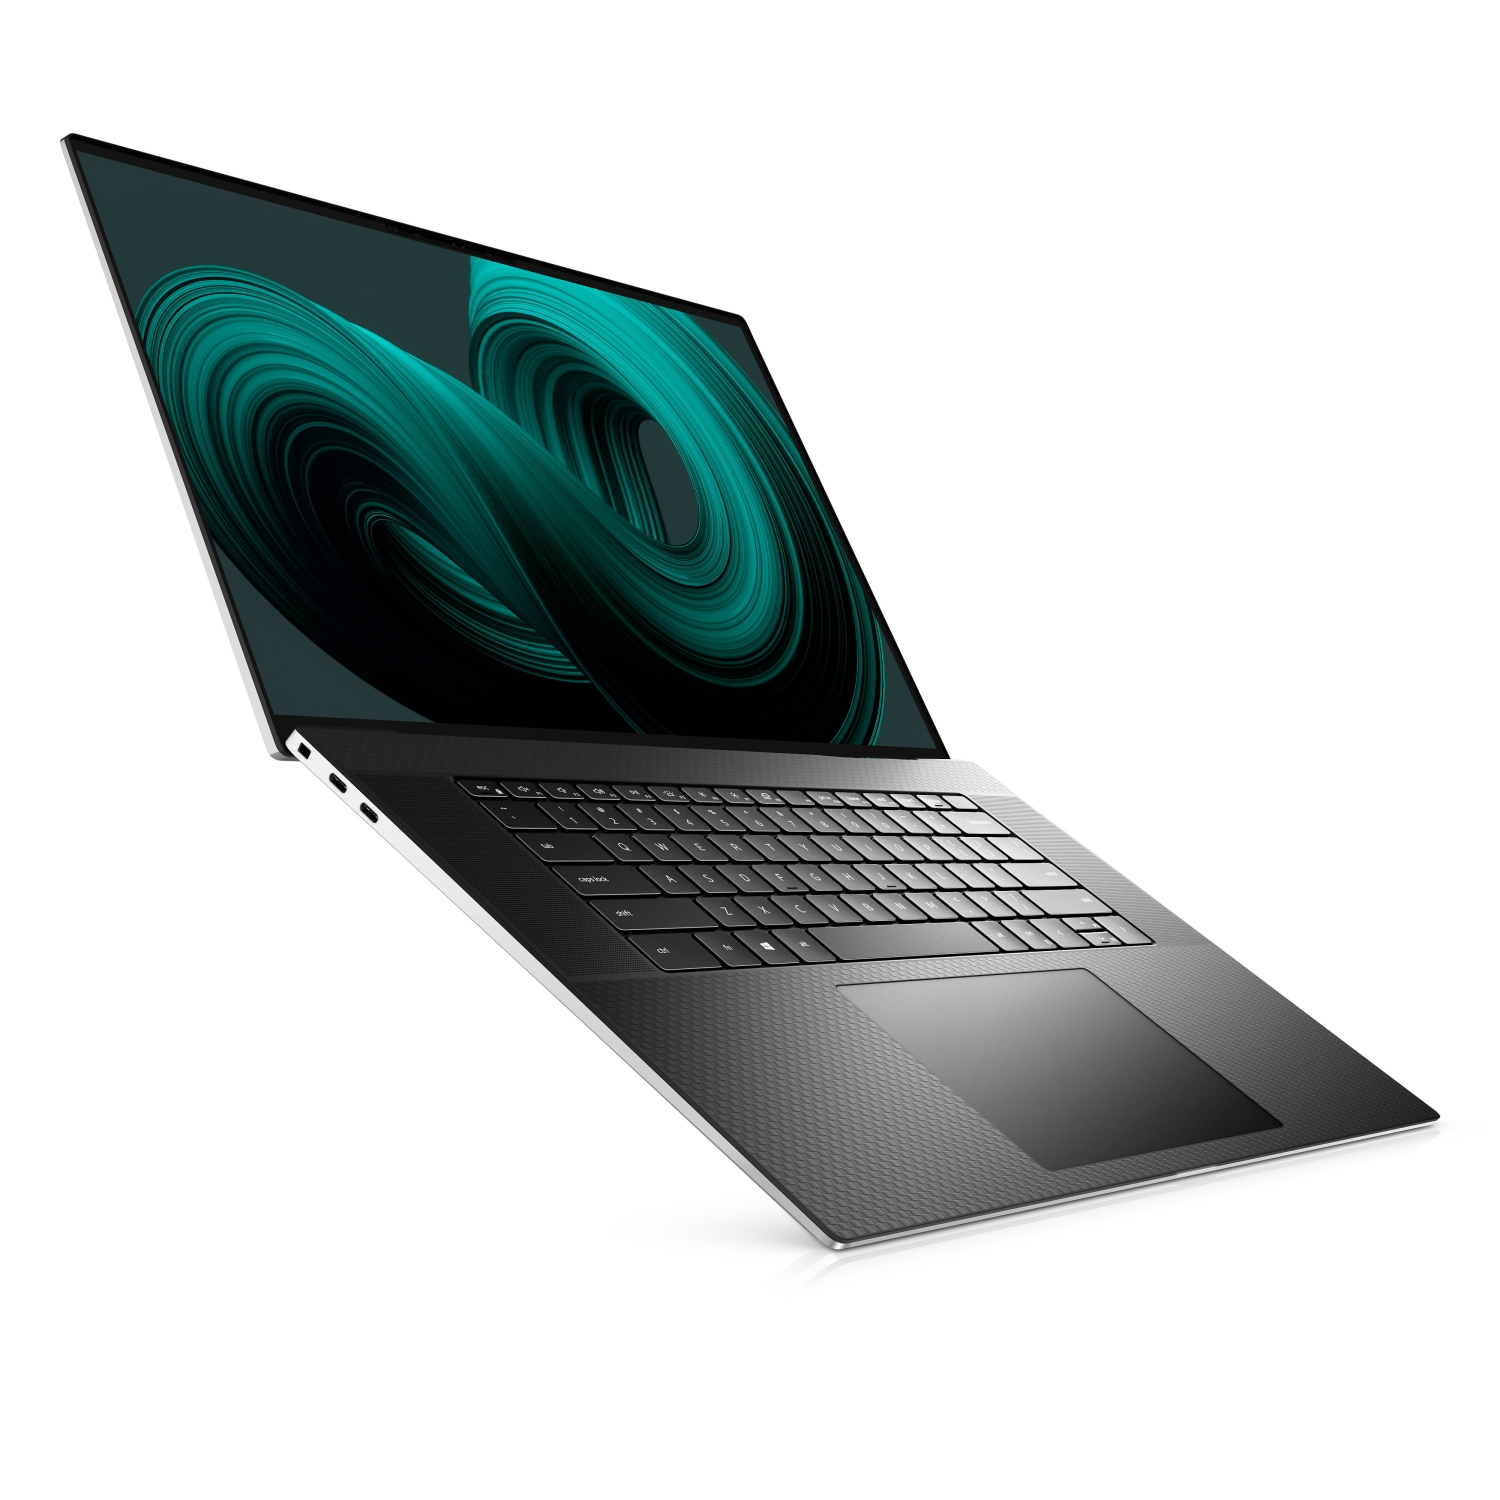 Refurbished (Excellent) - Dell XPS 17 9710 Laptop (2021) | 17" 4K Touch | Core i9 - 1TB SSD - 64GB RAM - RTX 3060 | 8 Cores @ 5 GHz - 11th Gen CPU Certified Refurbished